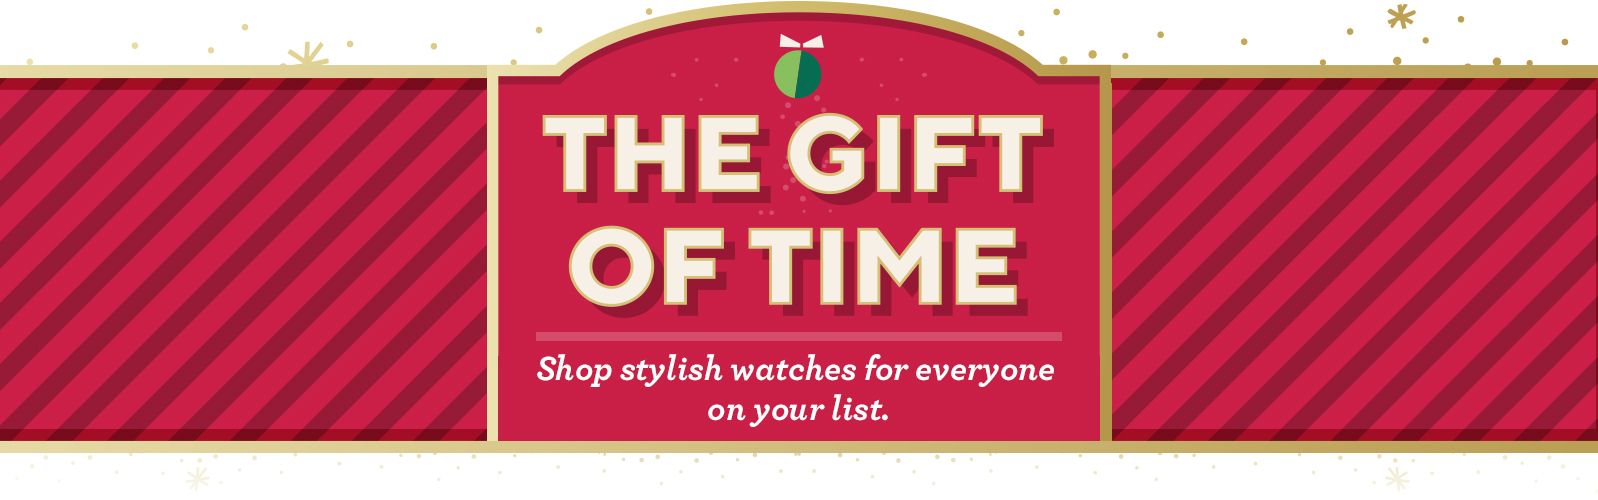 The Gift of Time.  Shop stylish watches for everyone on your list.